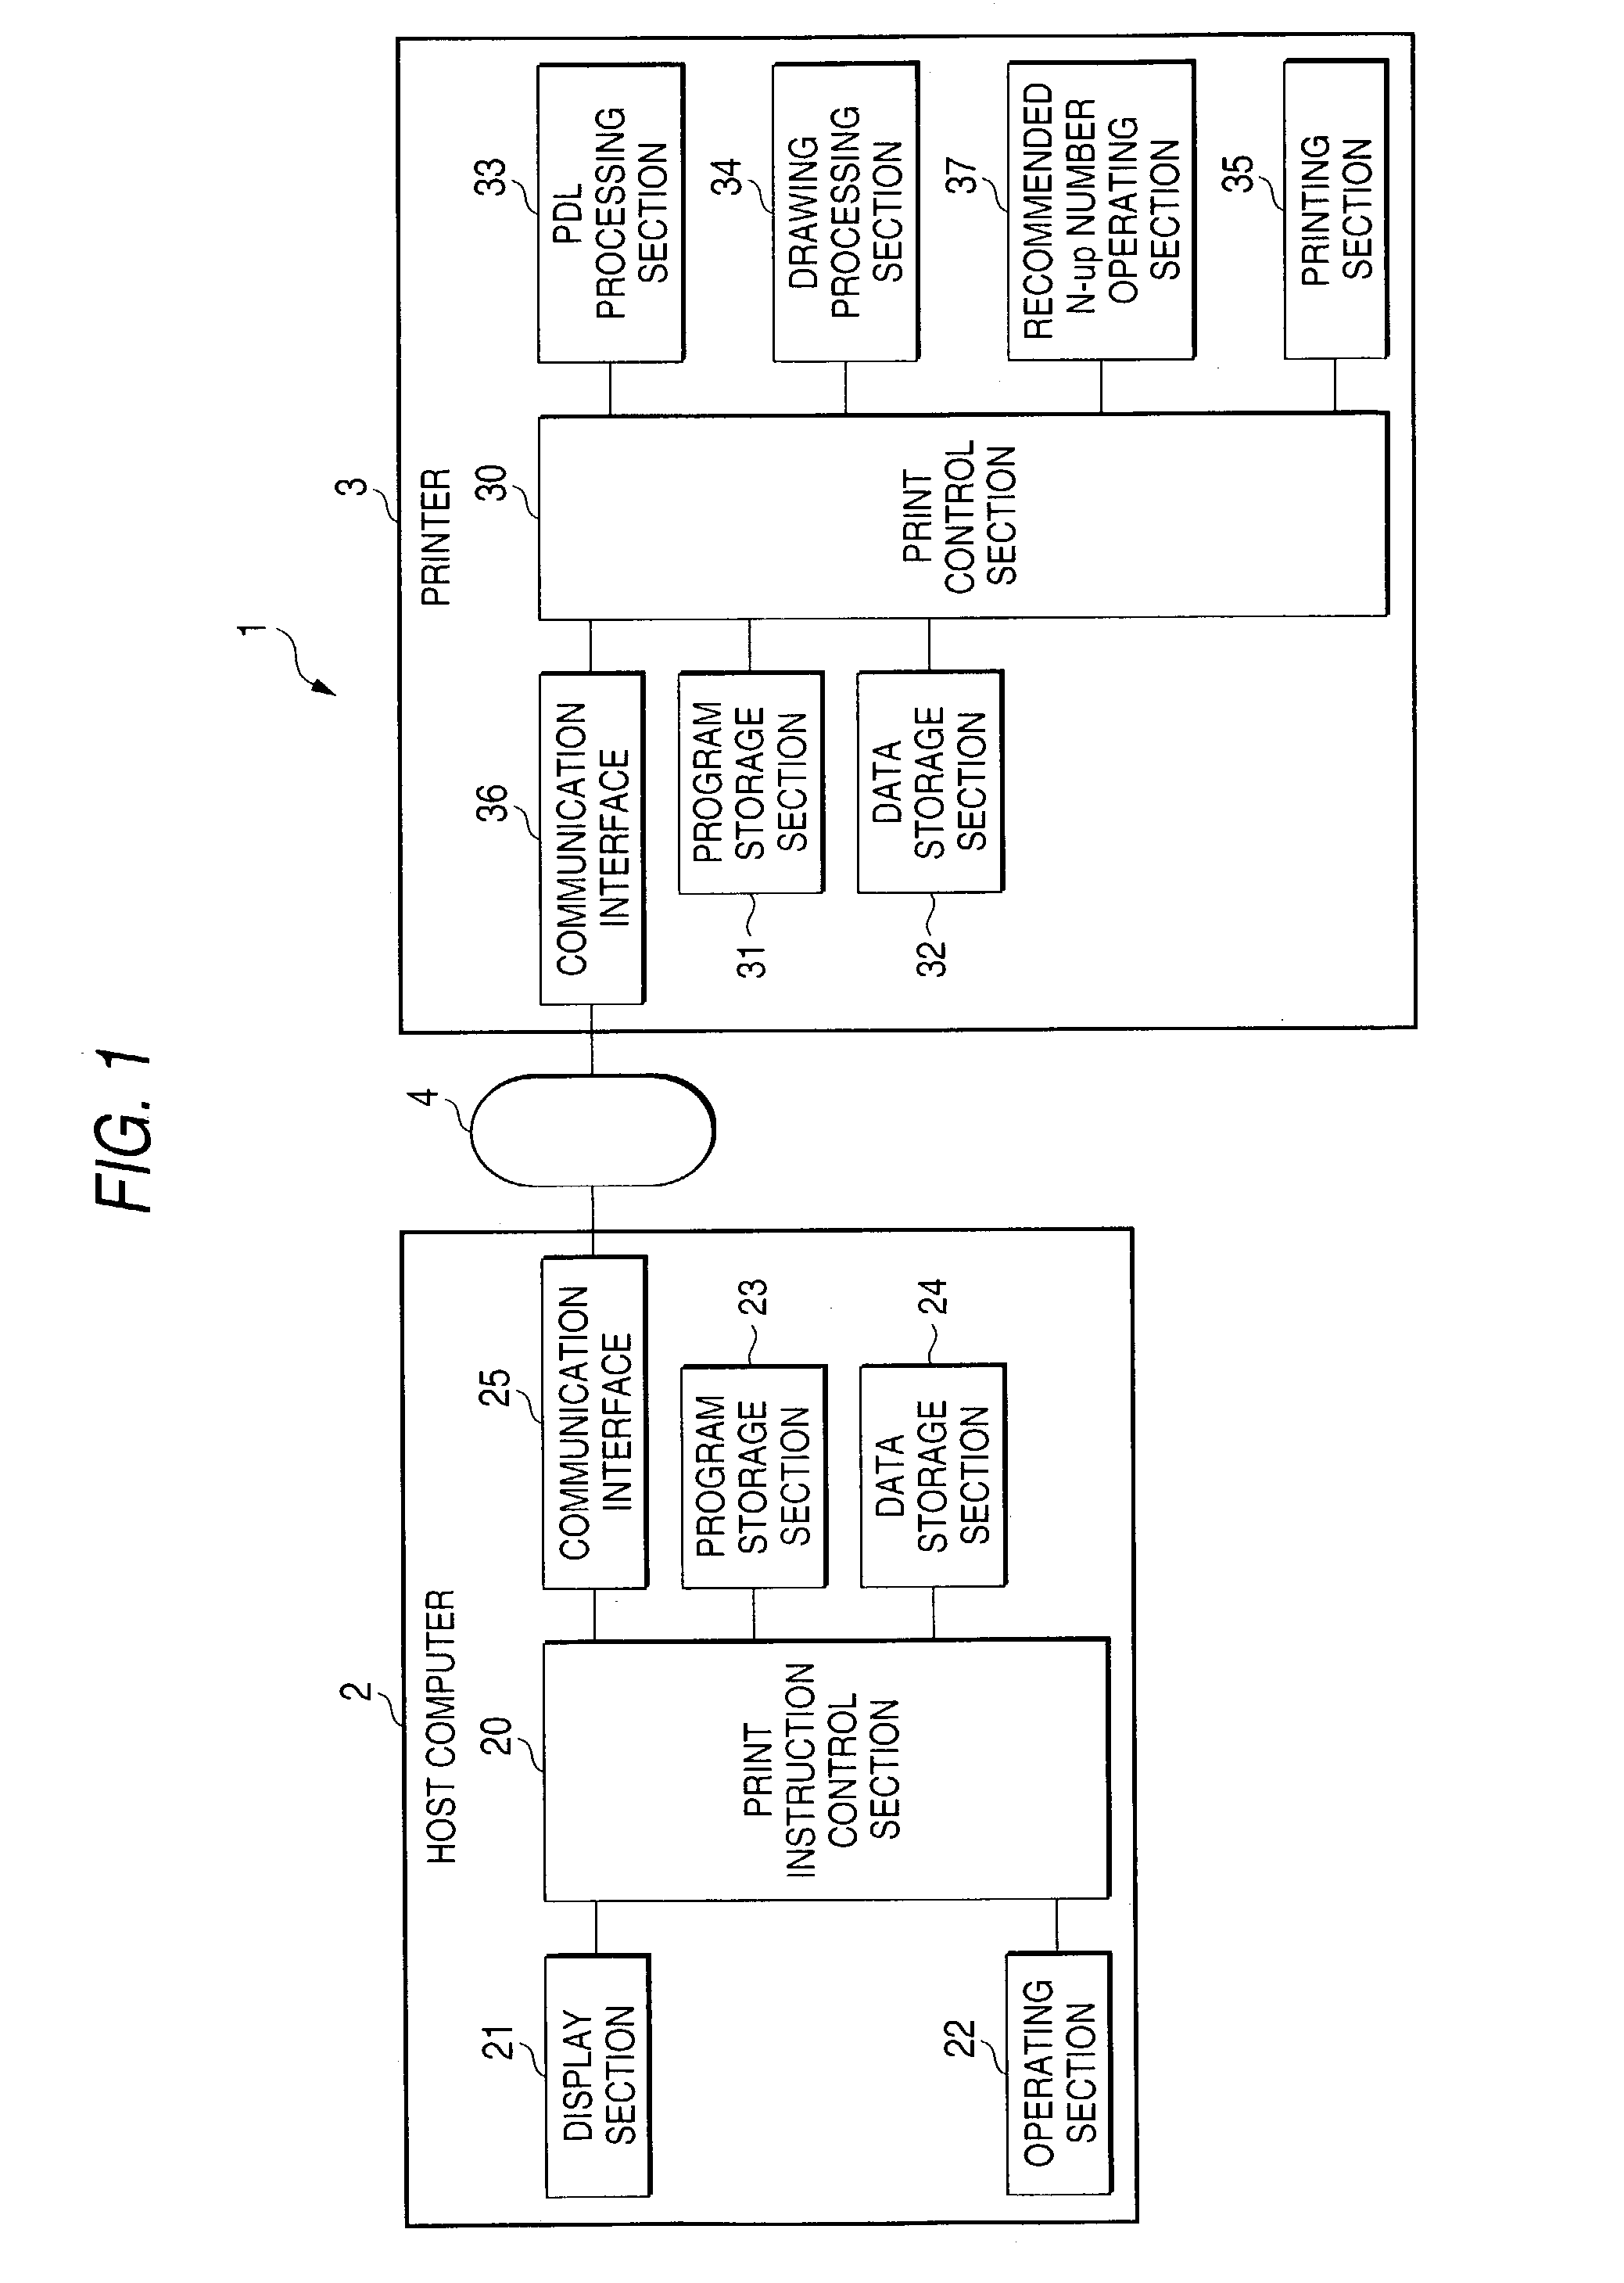 Printing apparatus, print instruction apparatus, image forming apparatus, printing method and a computer-readable recording medium storing a program for inputting a minimum character size for N-up mode printing